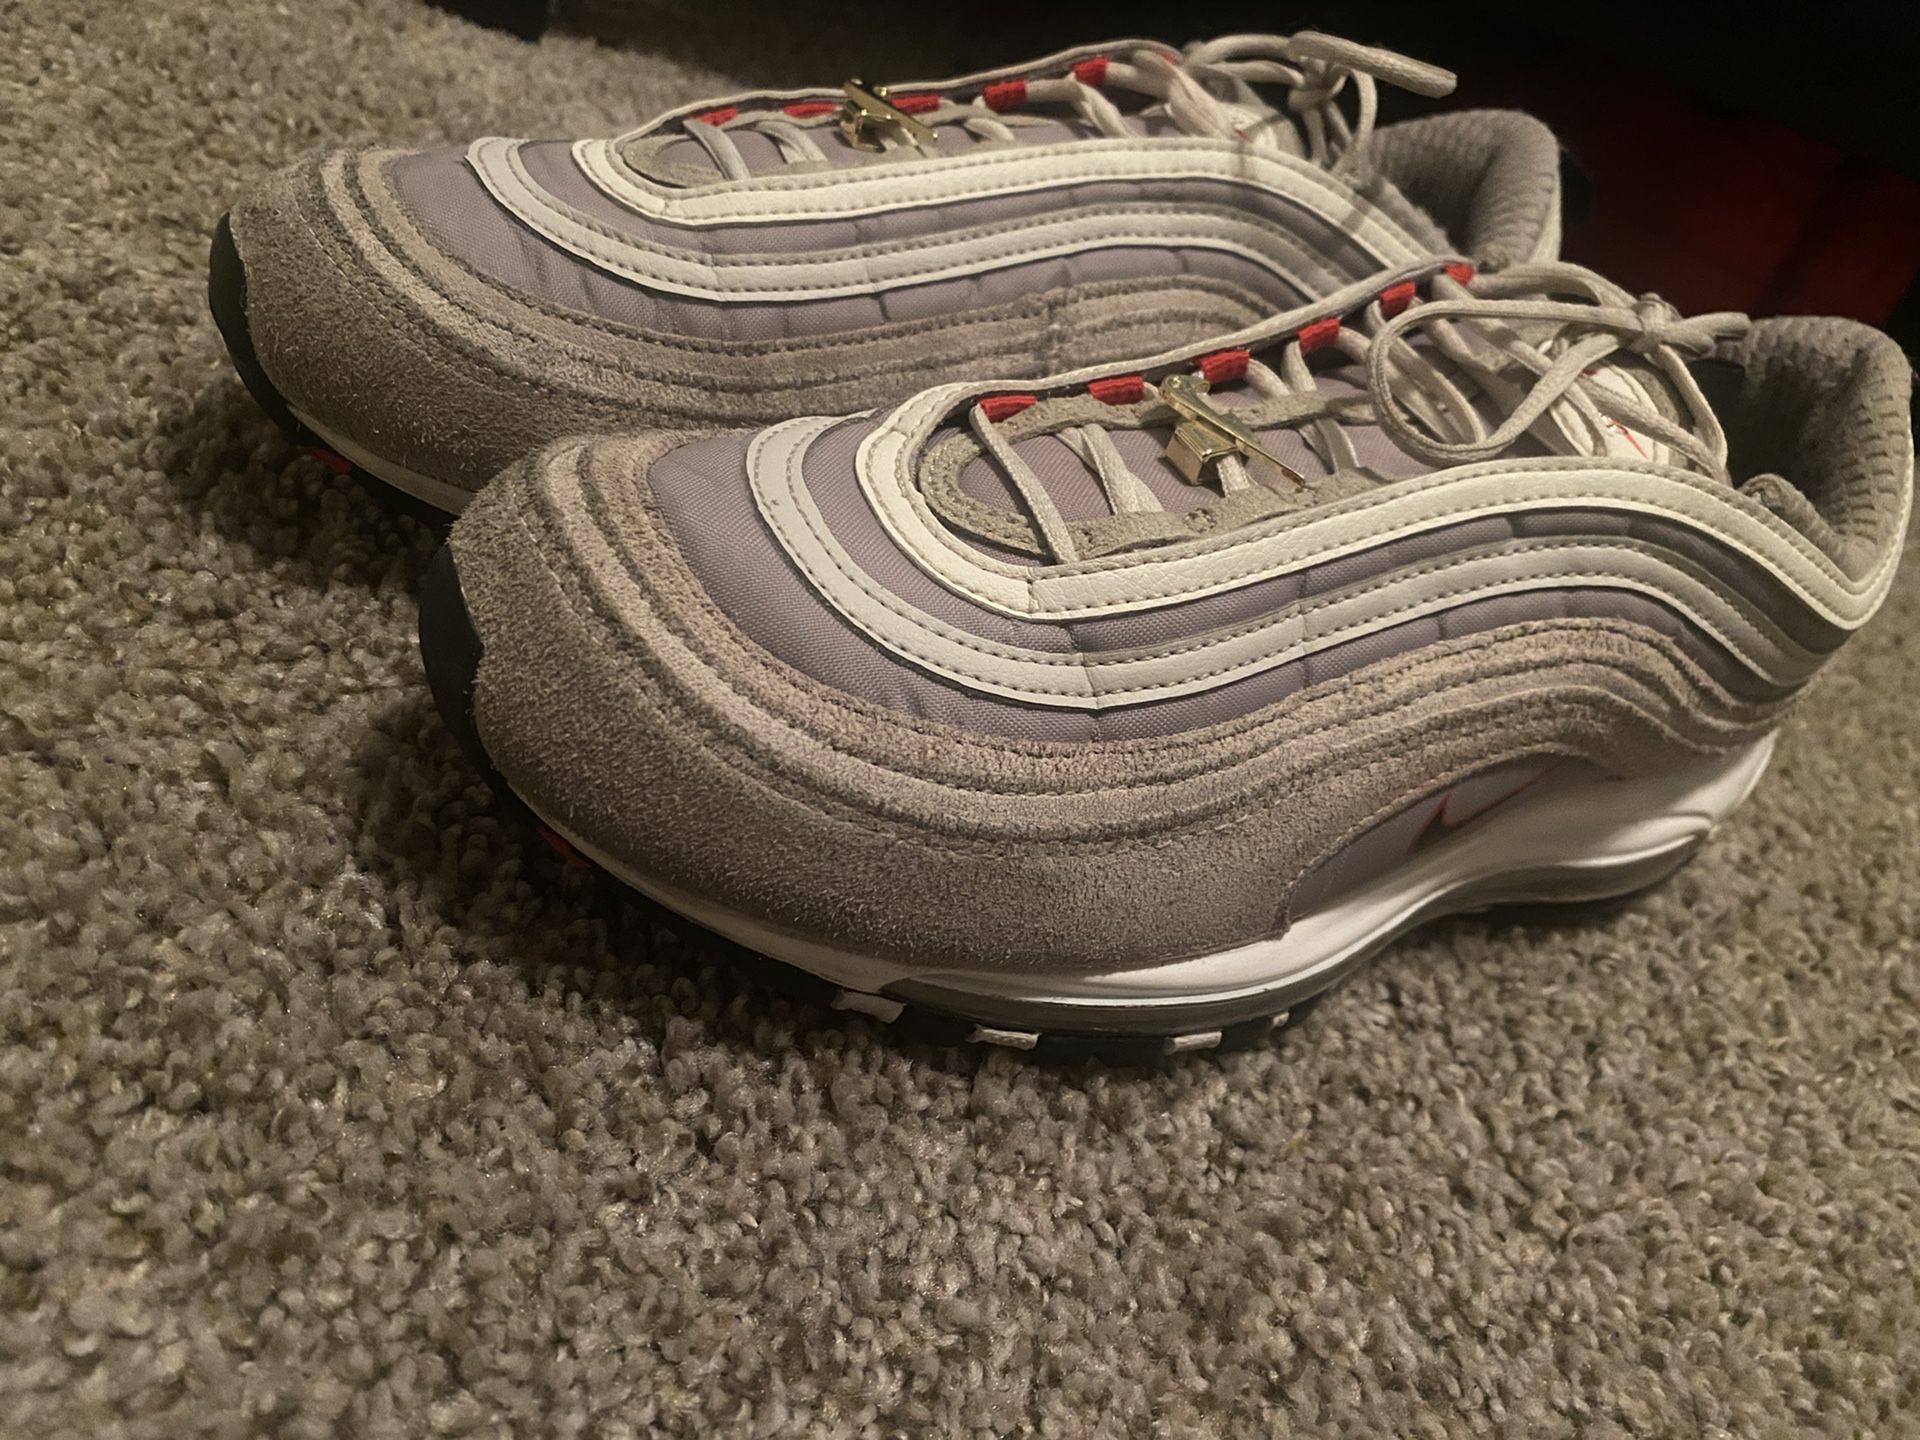 nike airmax 97 college grey size 9.5 Men For 50